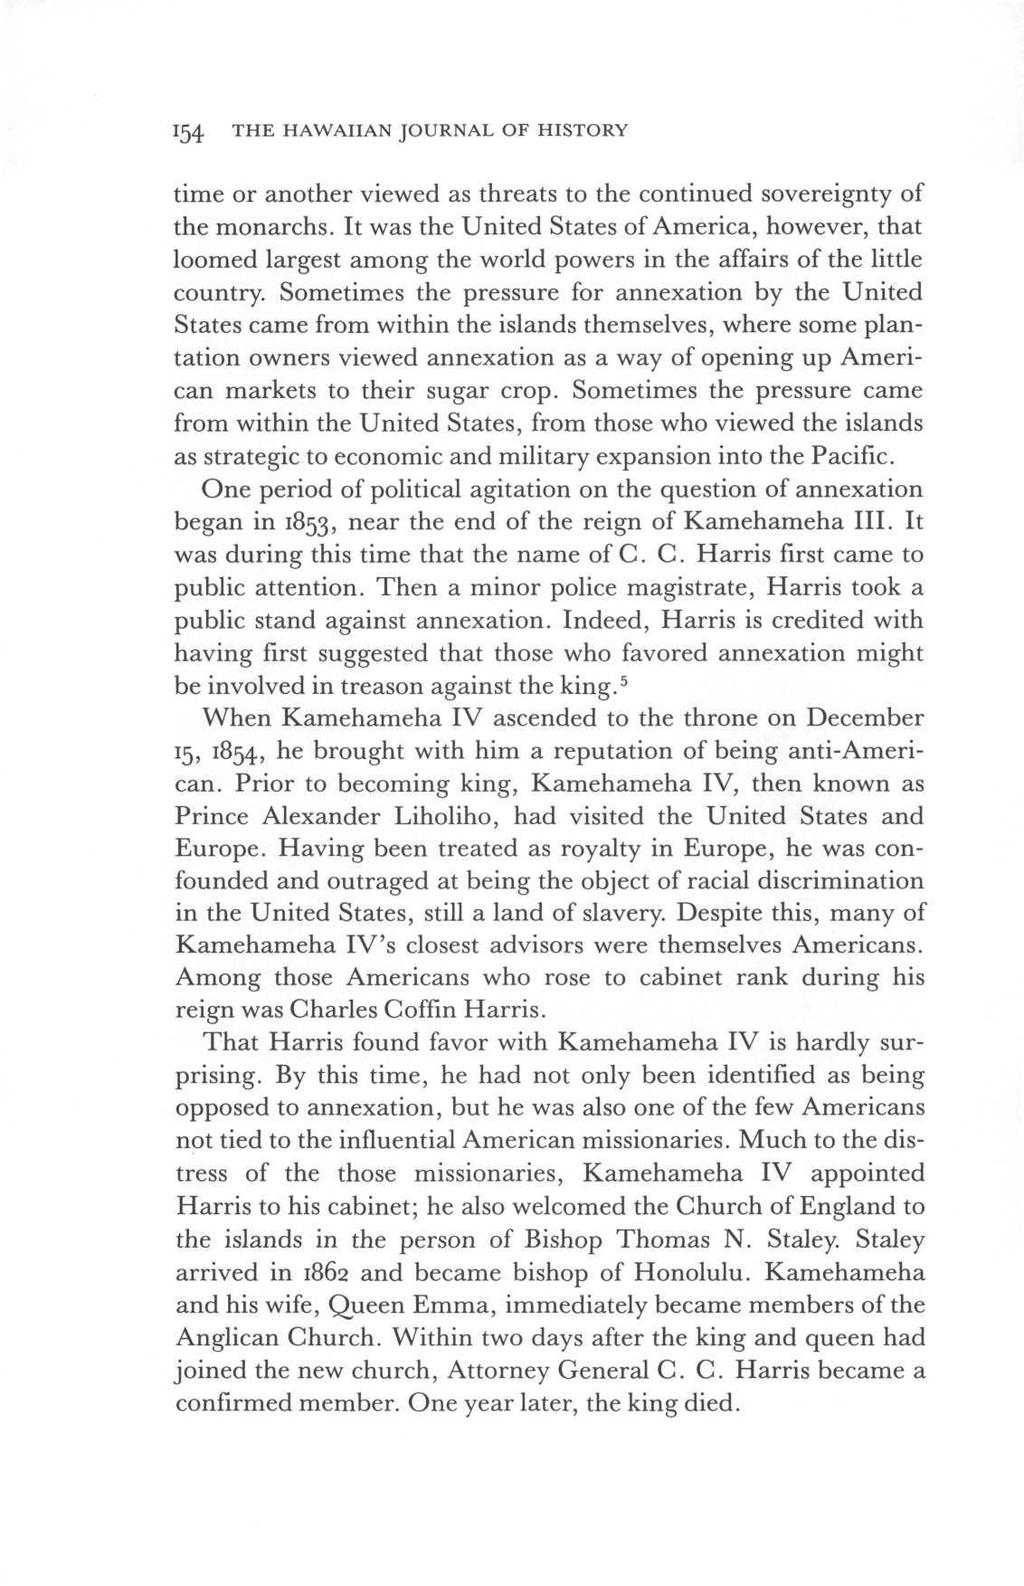 154 THE HAWAIIAN JOURNAL OF HISTORY time or another viewed as threats to the continued sovereignty of the monarchs.